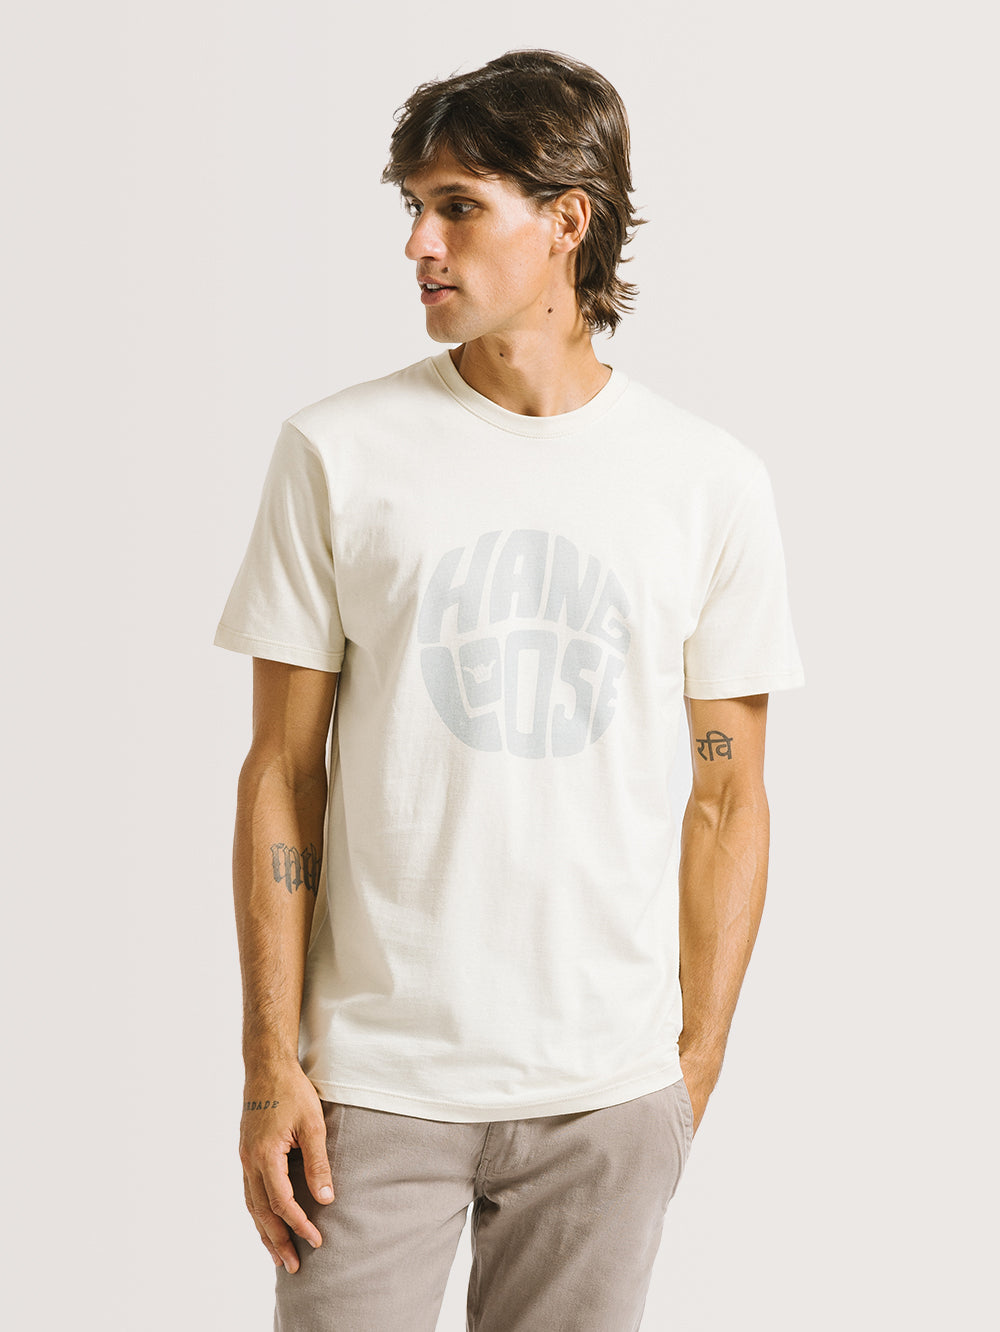 Camiseta Hang Loose Rounded Off White